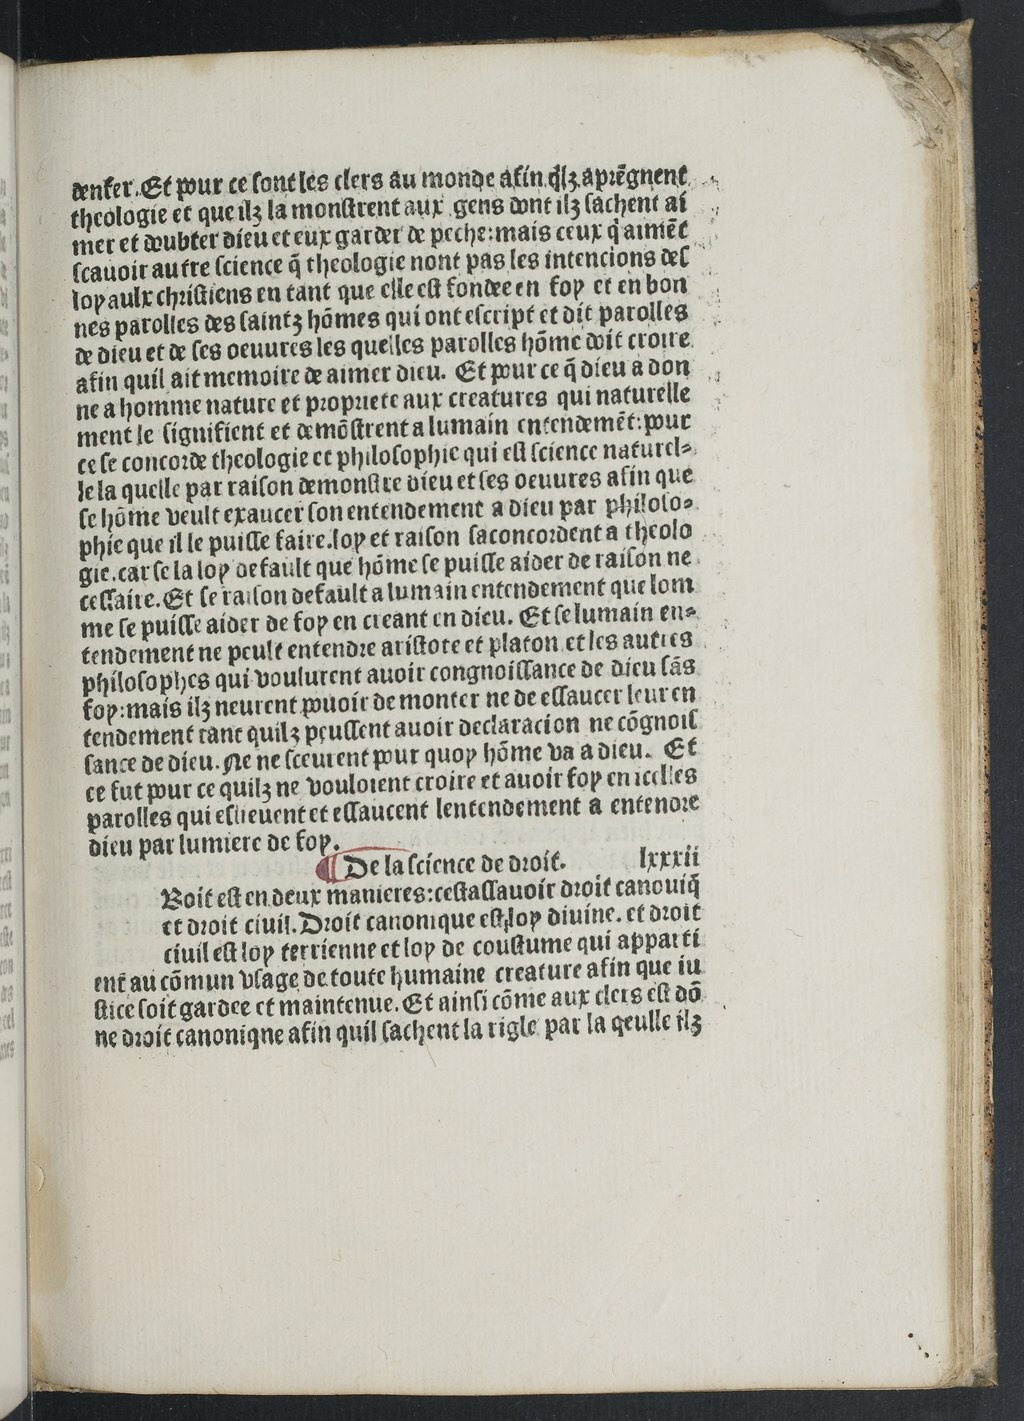 1482 [Antoine Caillaut] Trésor des humains BnF_Page_107.jpg